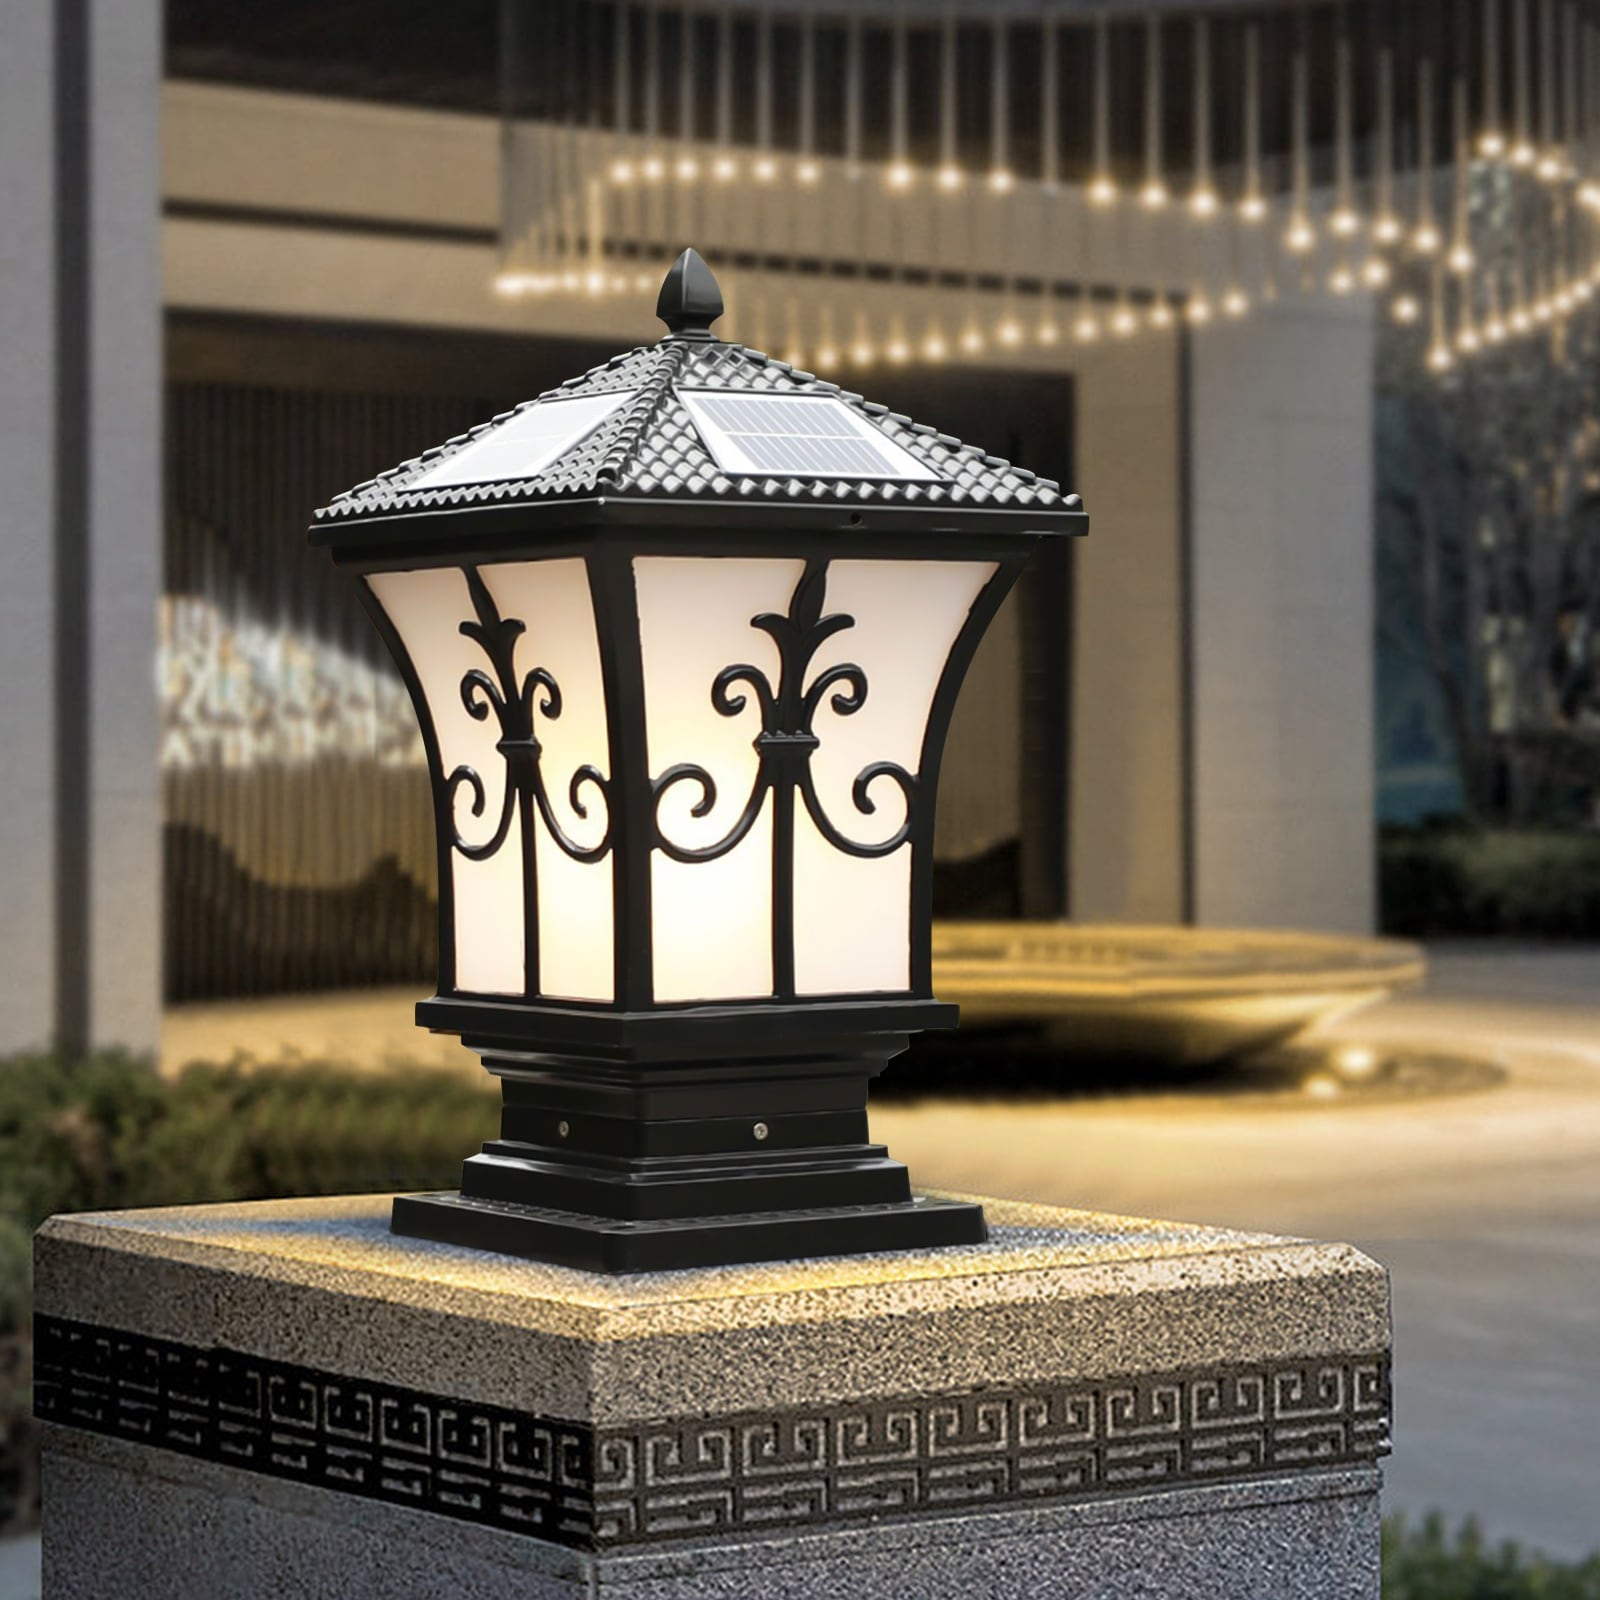 Solar Post Light Outdoor Fence Cap Lamp Waterproof Pillar Lamp  5.91*5.91*14.97 inches On Sale Bed Bath  Beyond 36484111